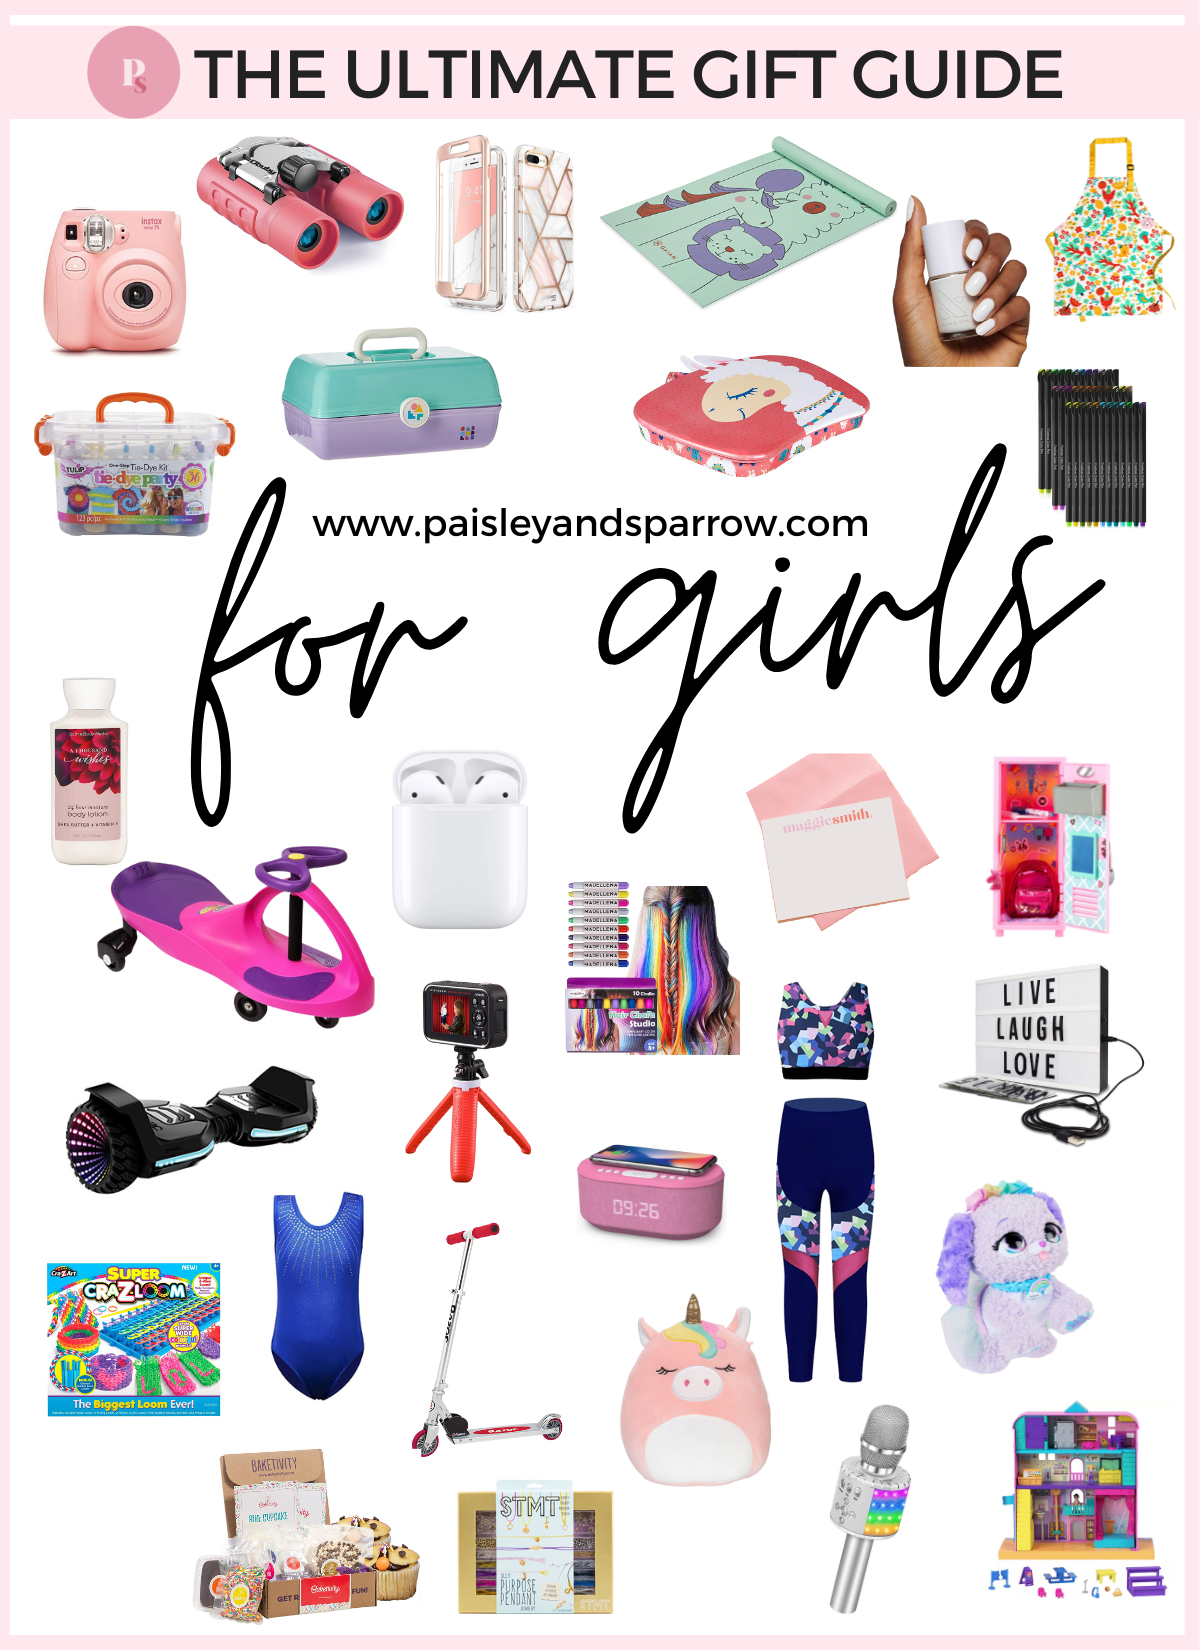 One Year Old Girl Gift Guide - arinsolangeathome